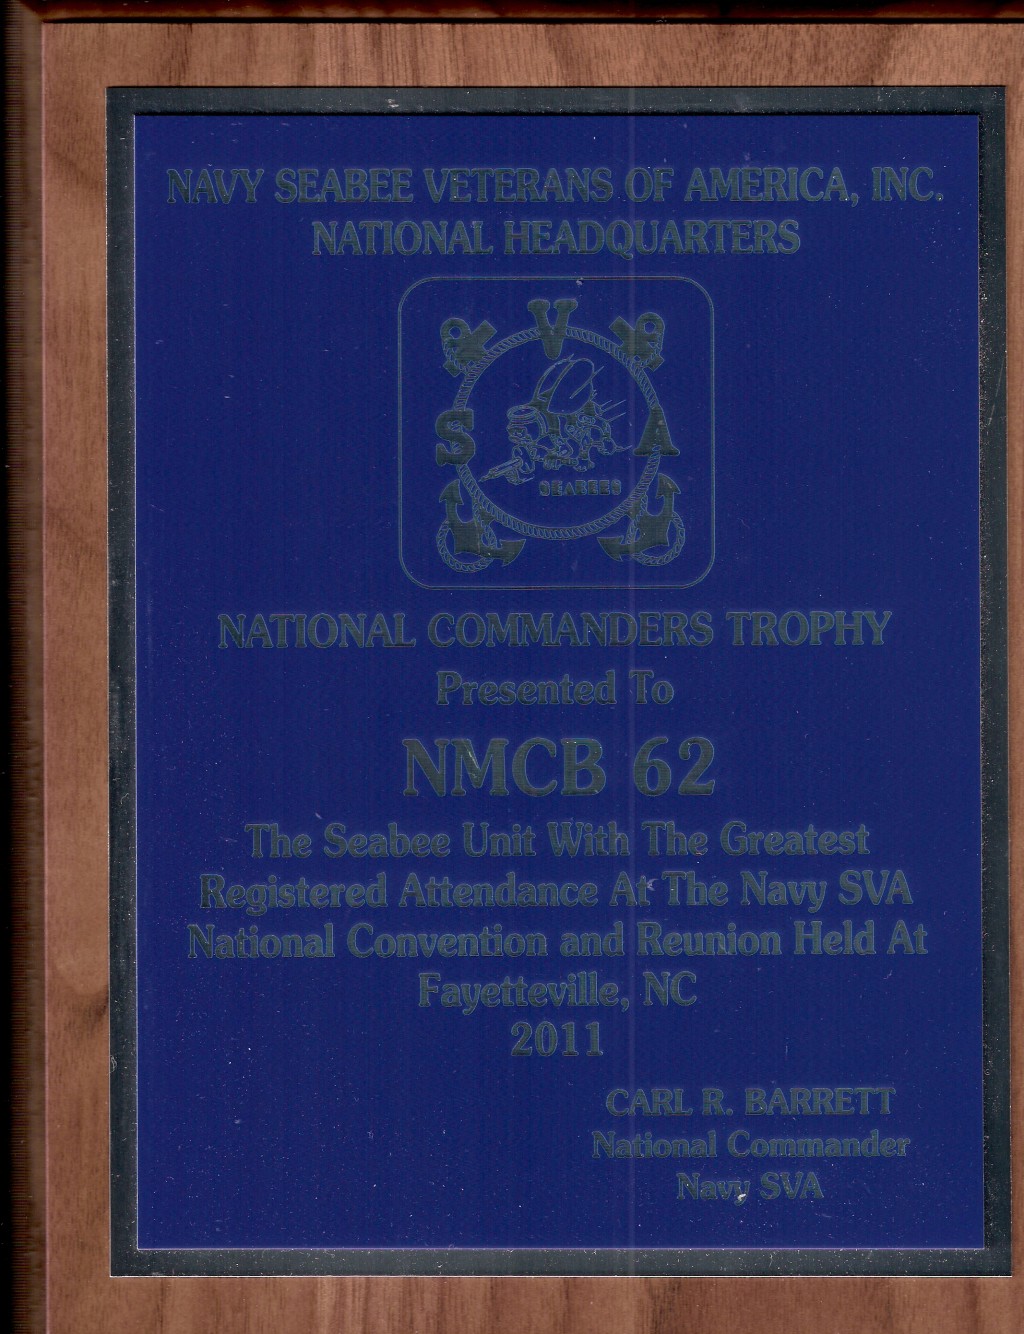 National Commanders Trophy August 2011 National Convention Fayetteville, NC